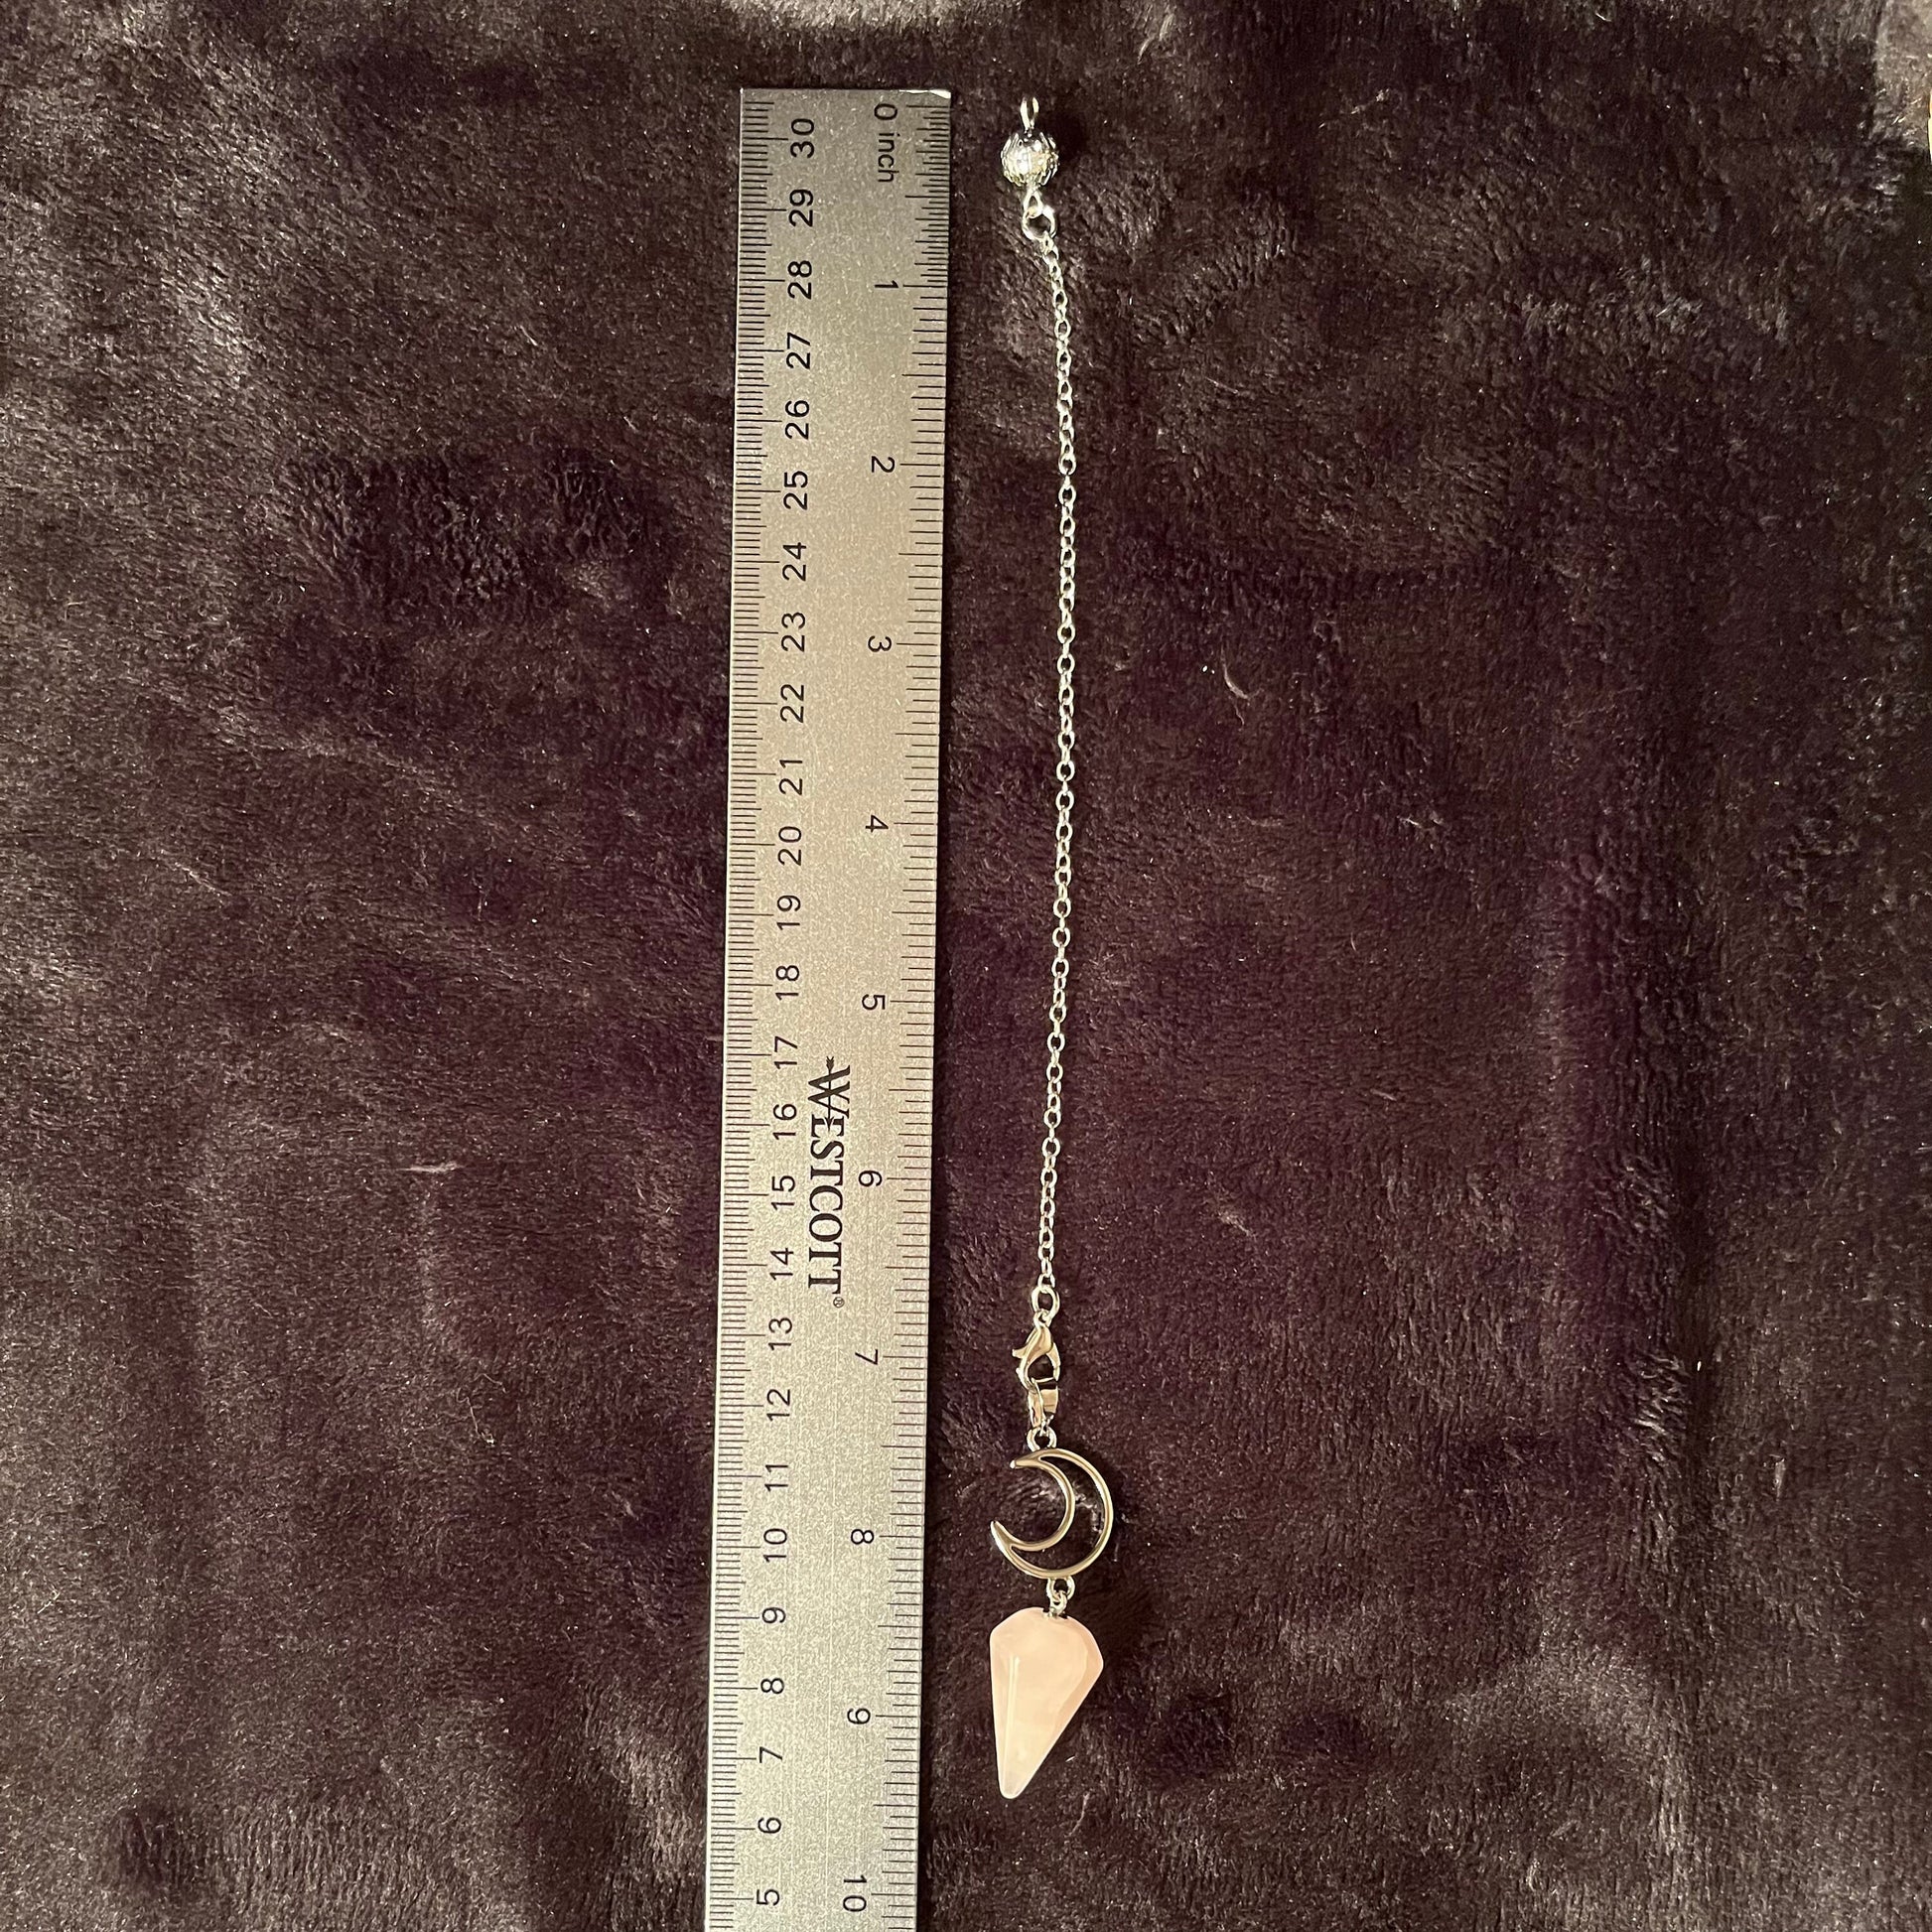 1 inch rose quartz pendulum attatched to an 8 inch silver chain including chakra beads amd a silver crescent moon displayed next to a silver ruler on a black background